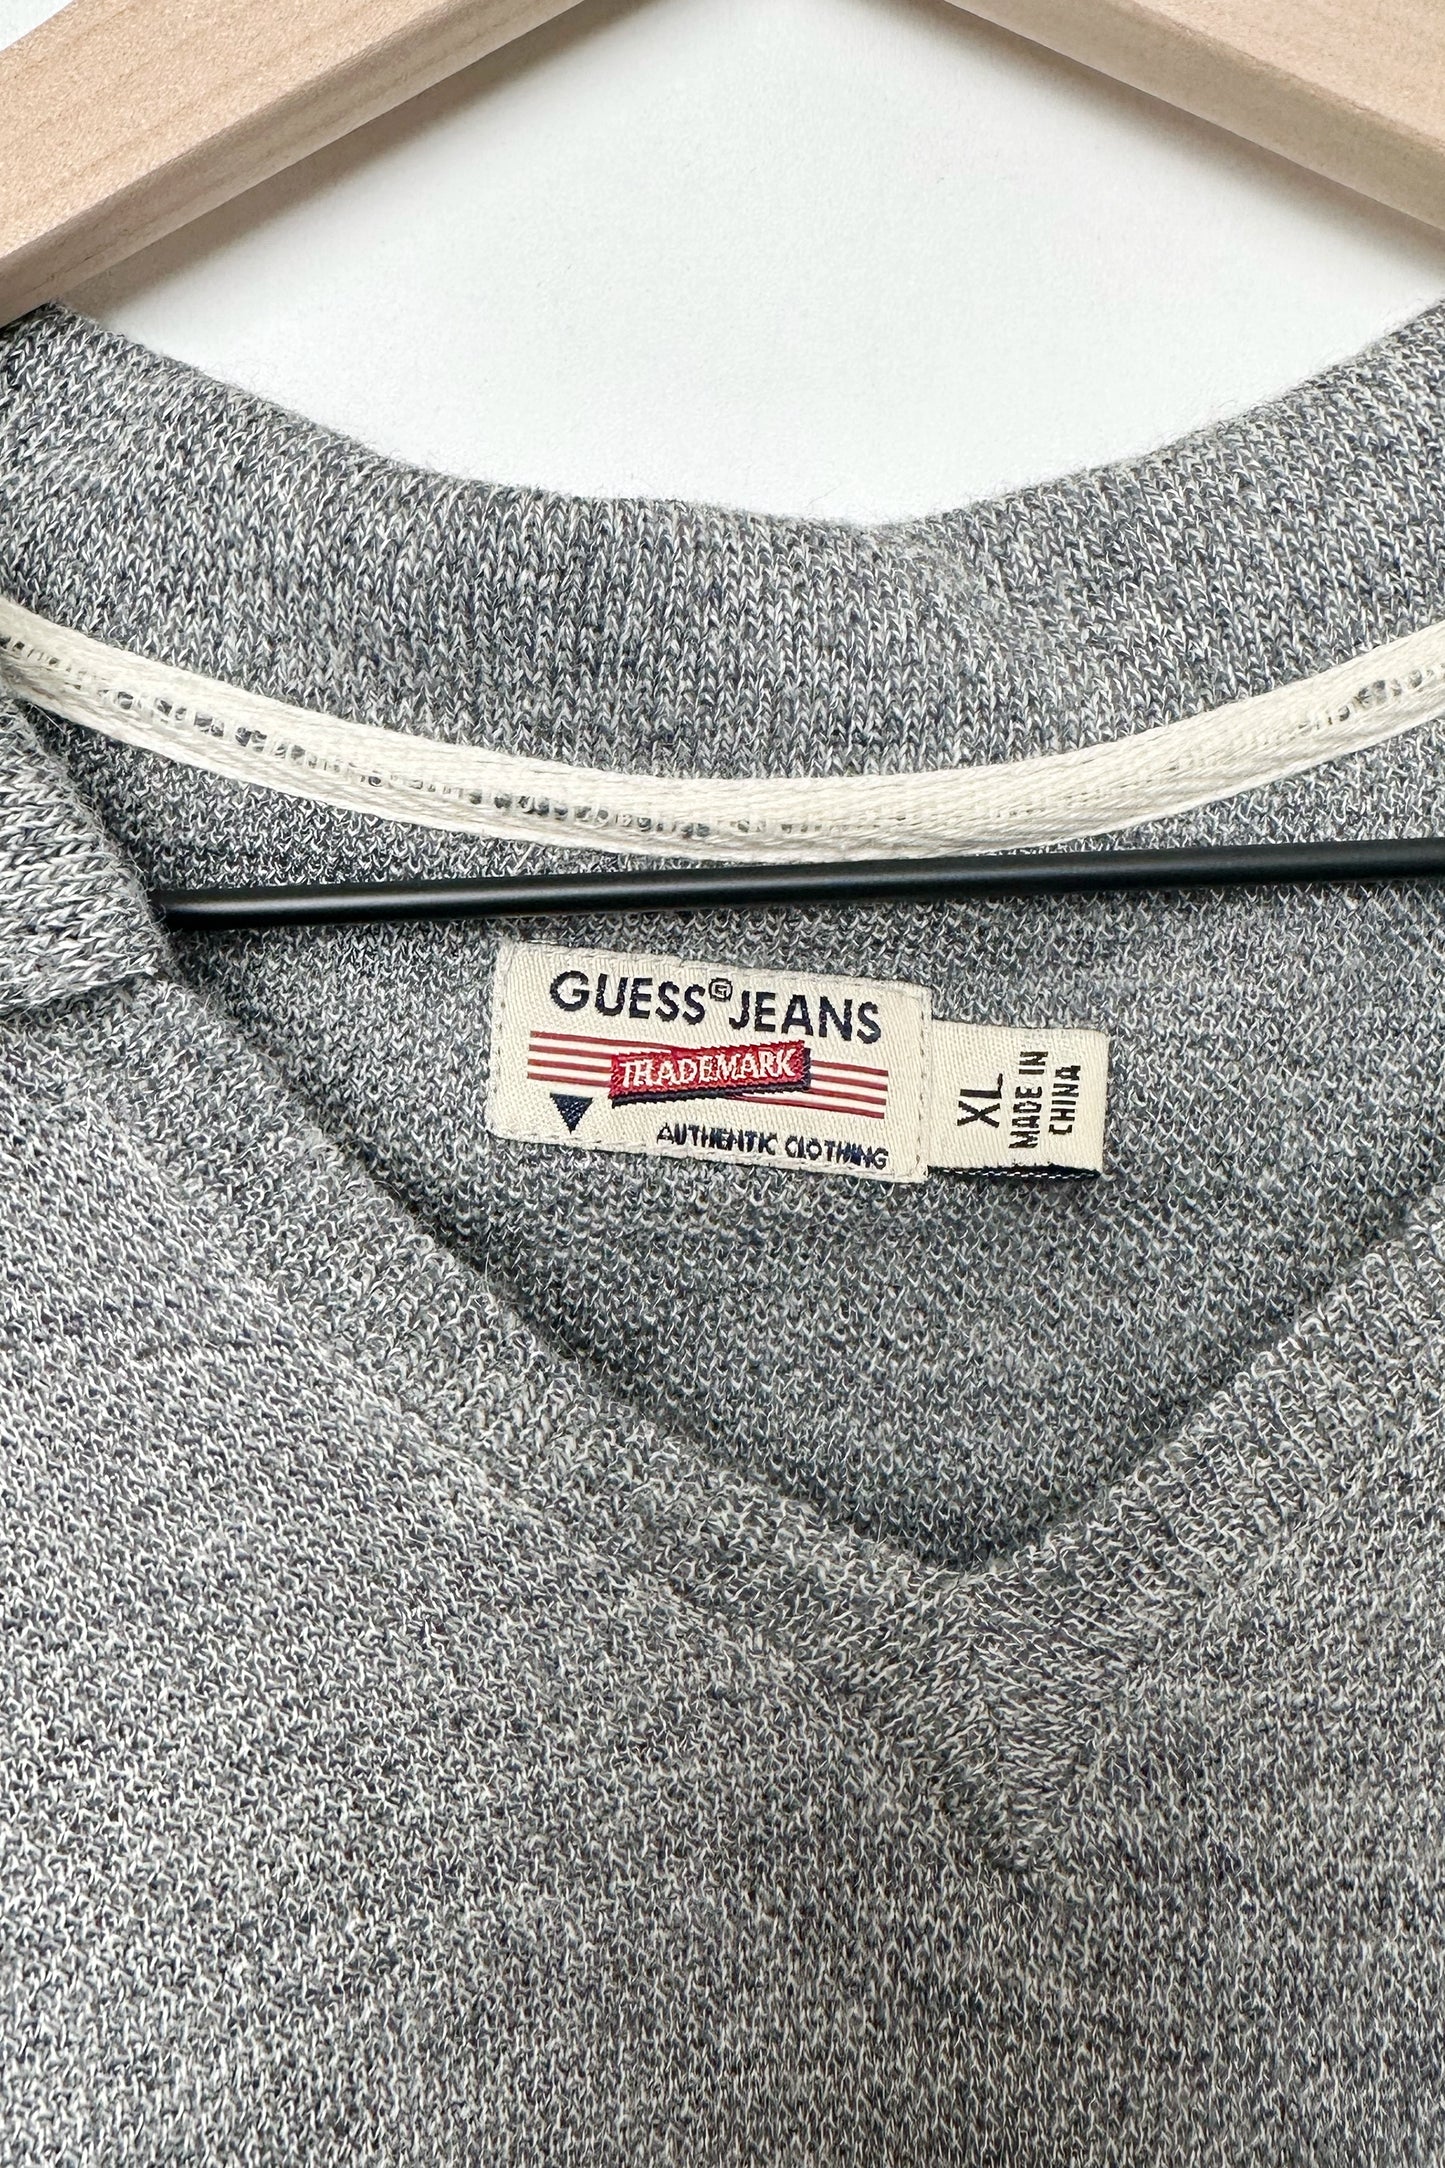 Guess Heather Grey Polo Wool Blend Sweater Dress XL, 90's Oversized